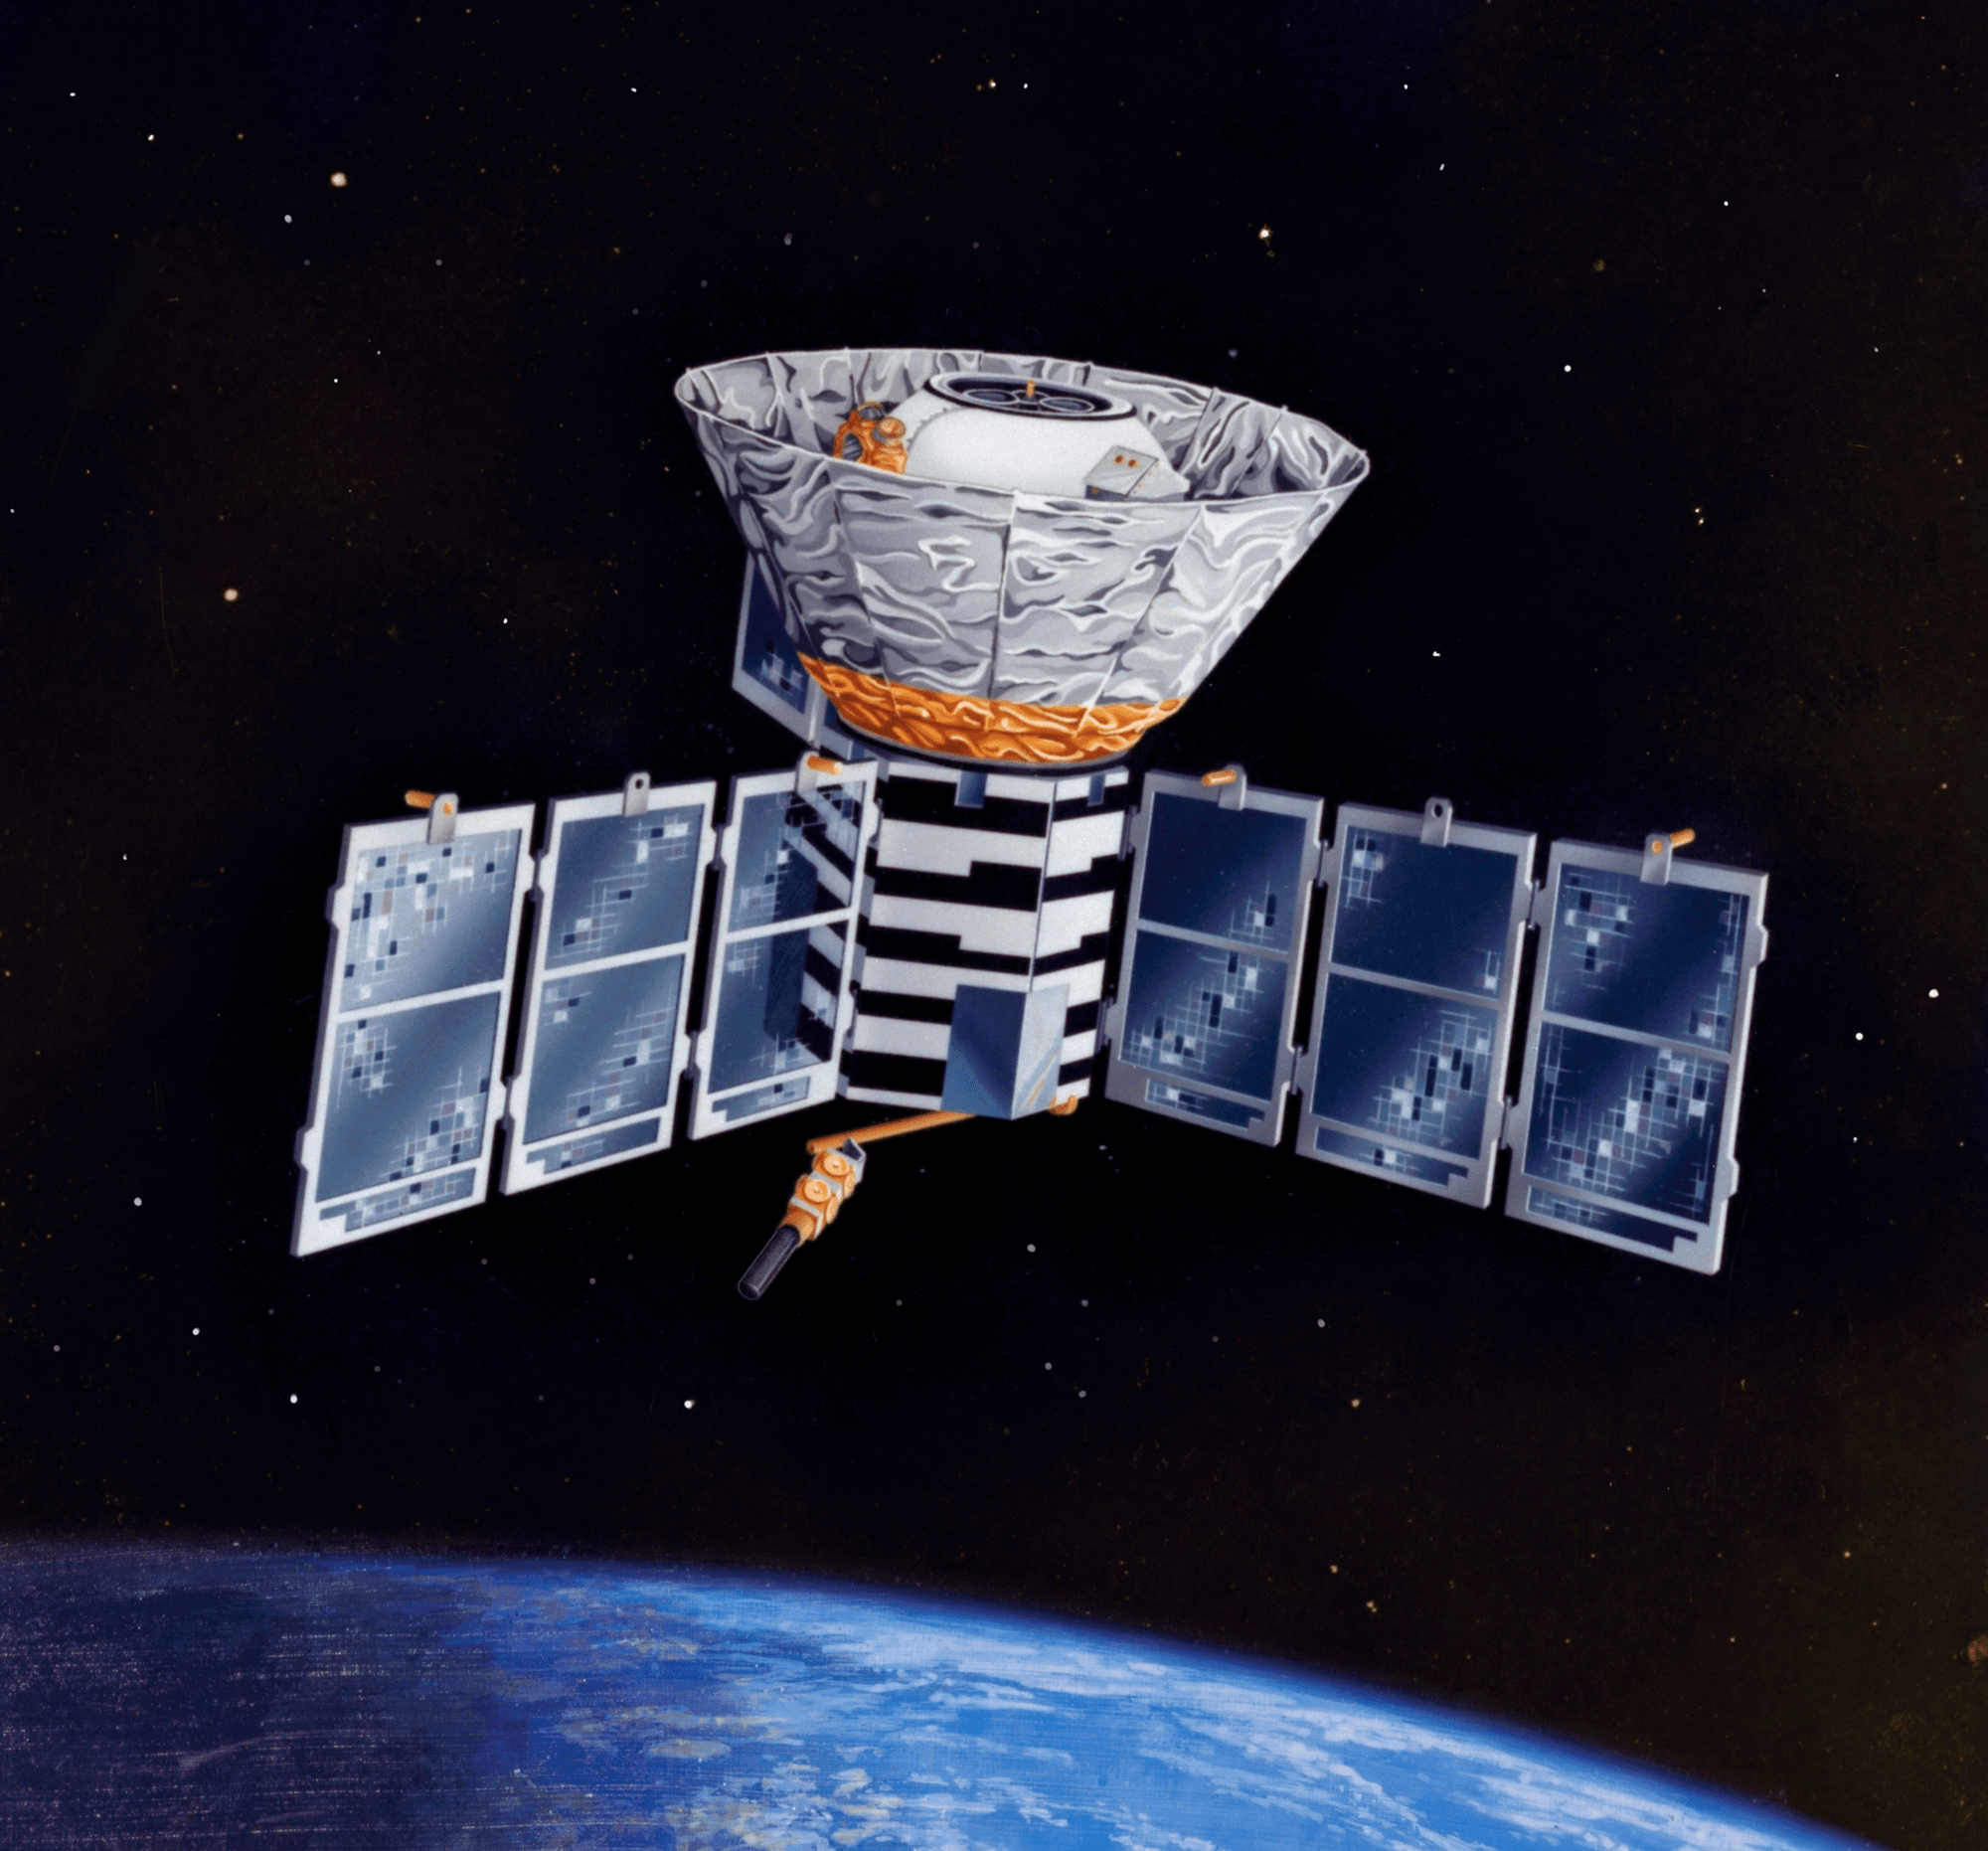 The COBE spacecraft orbits above Earth